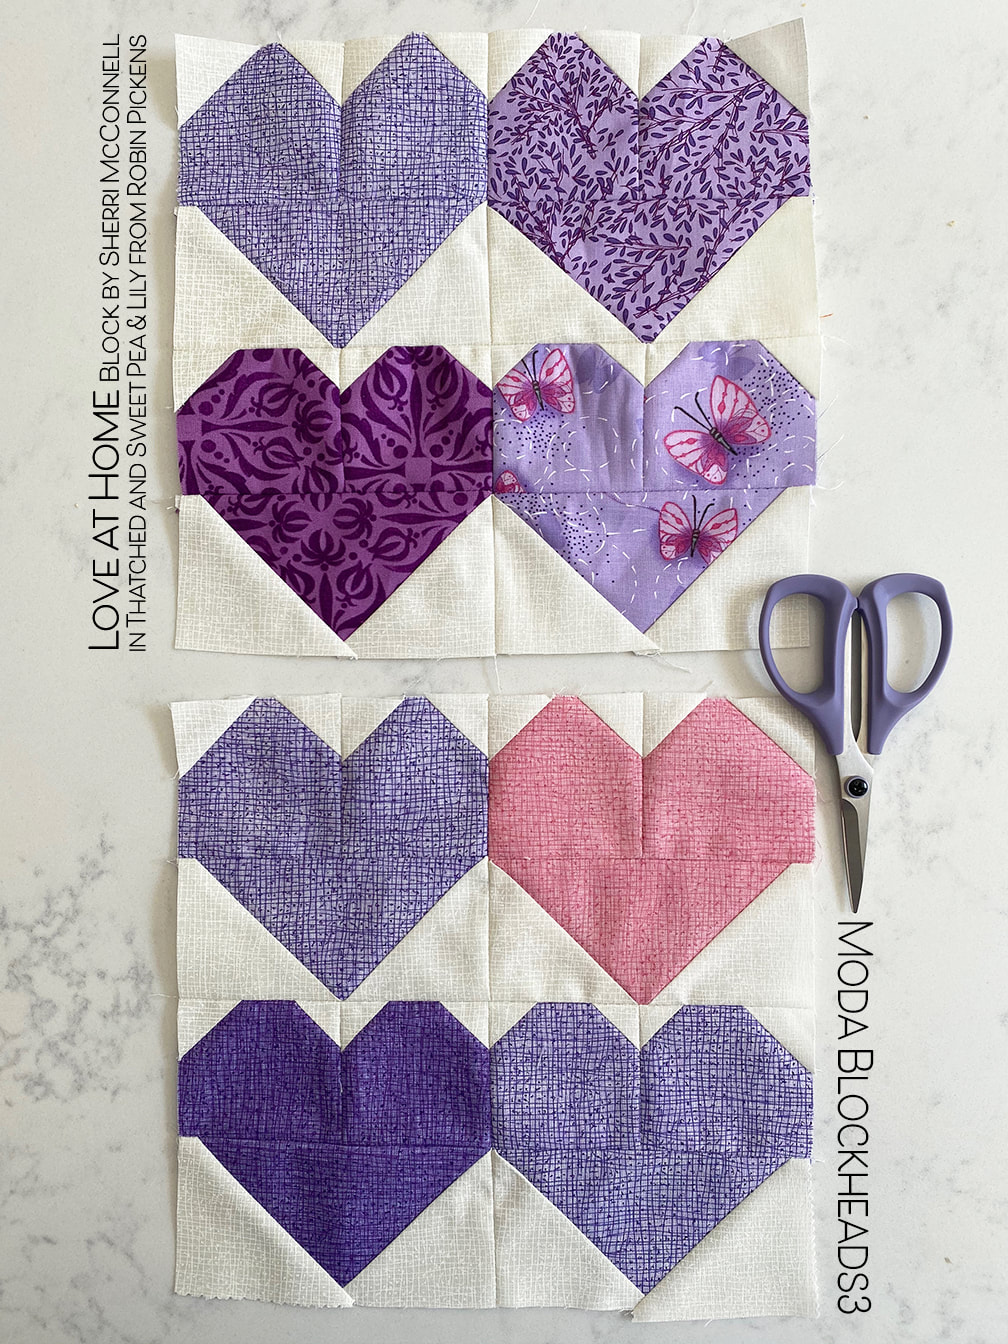 Love at Home quilt block in Thatched and Sweet Pea and Lily from Robin Pickens